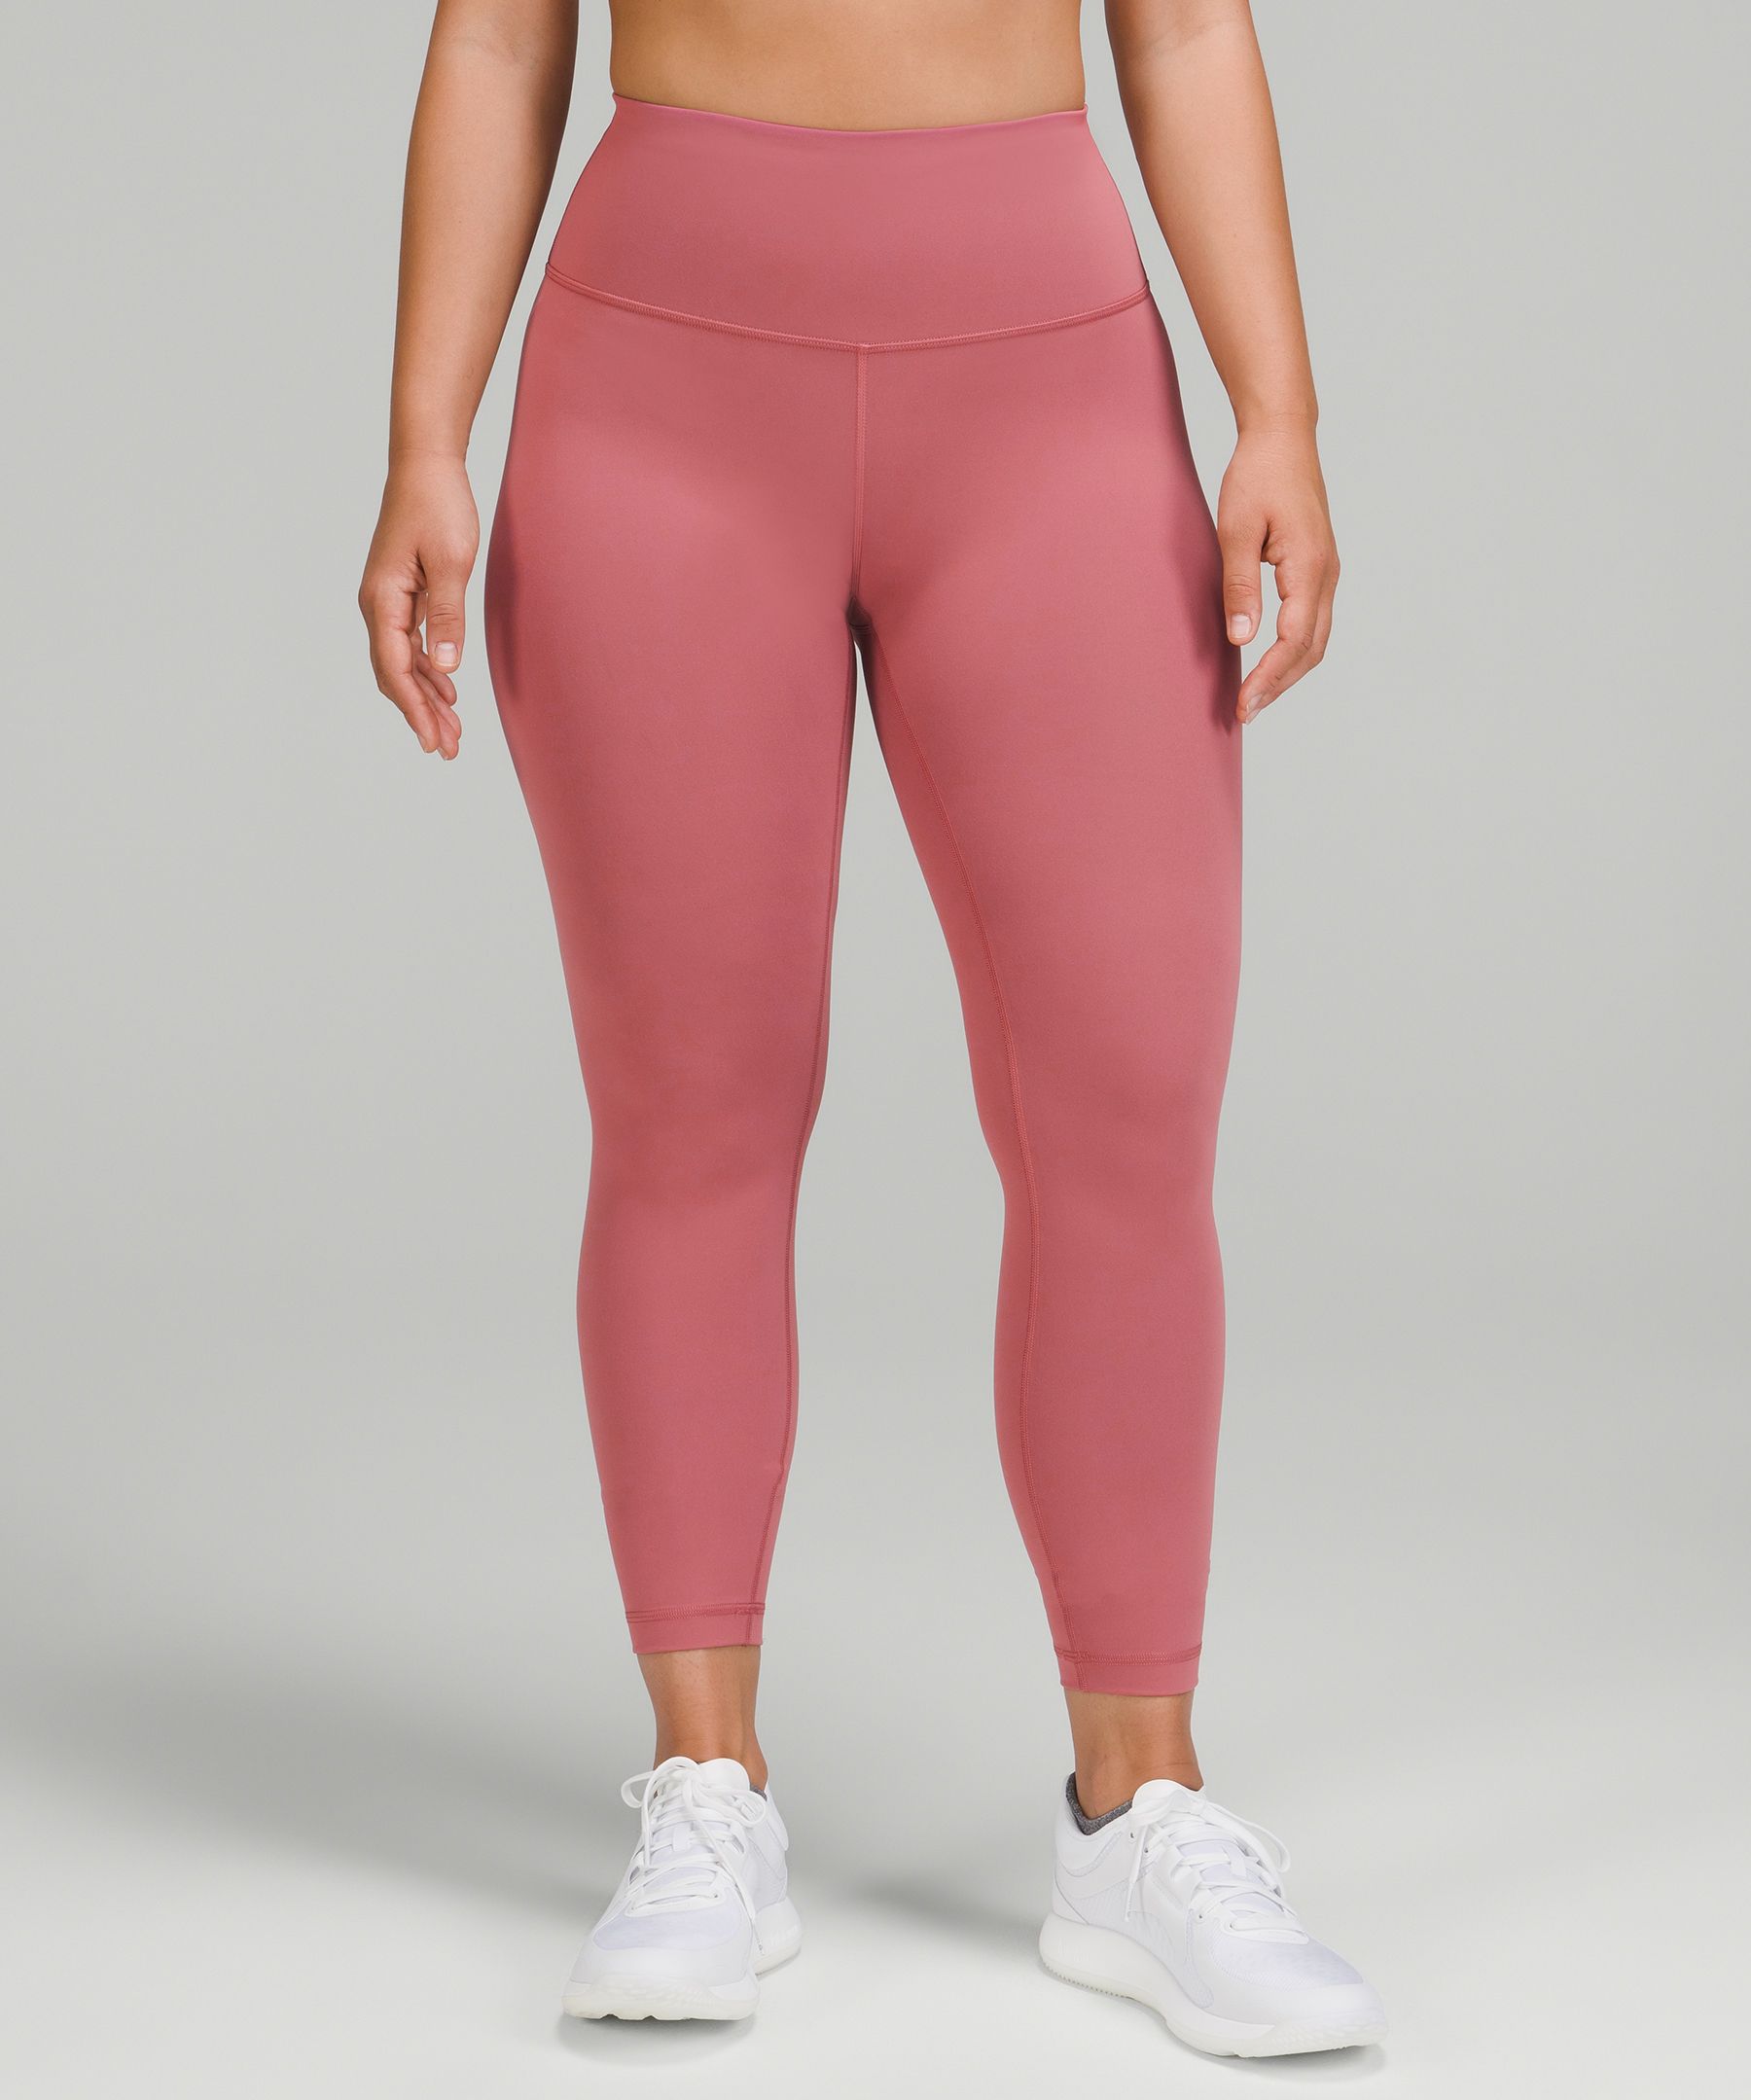 Lululemon Wunder Train Contour Fit High-rise Tights 25" In Brier Rose